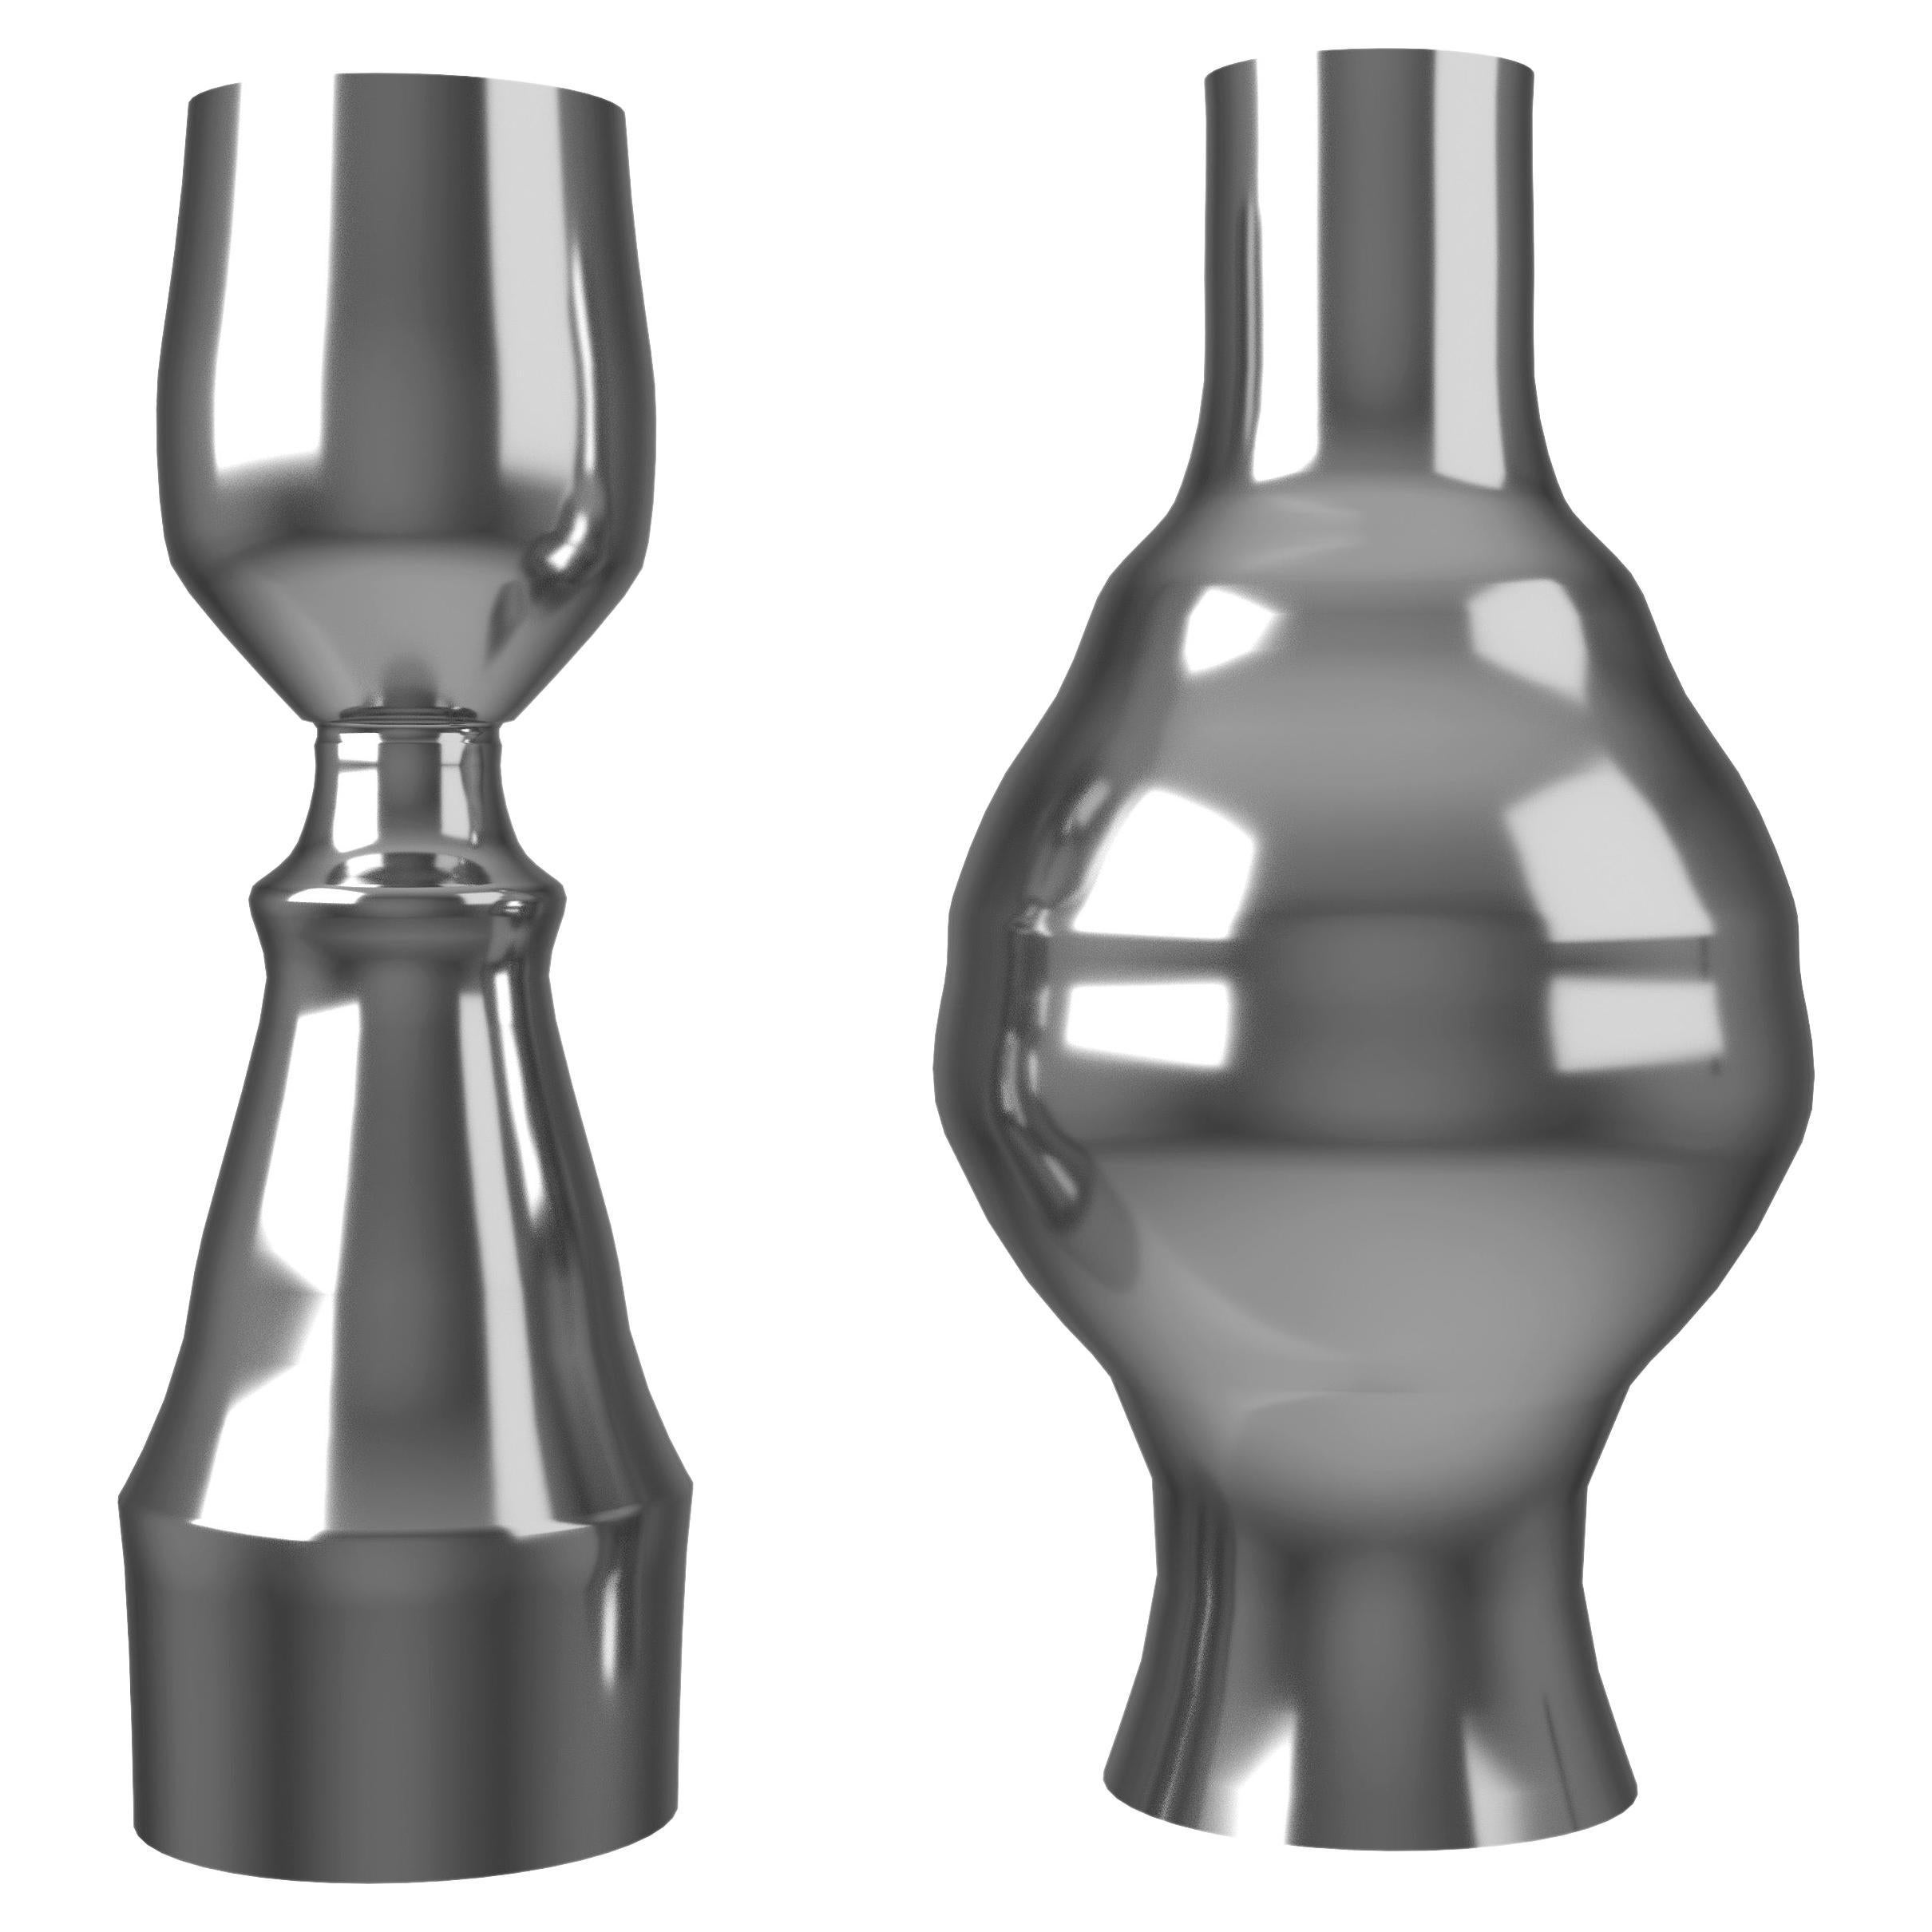  Inamorata Pair of polished aluminum vases For Sale